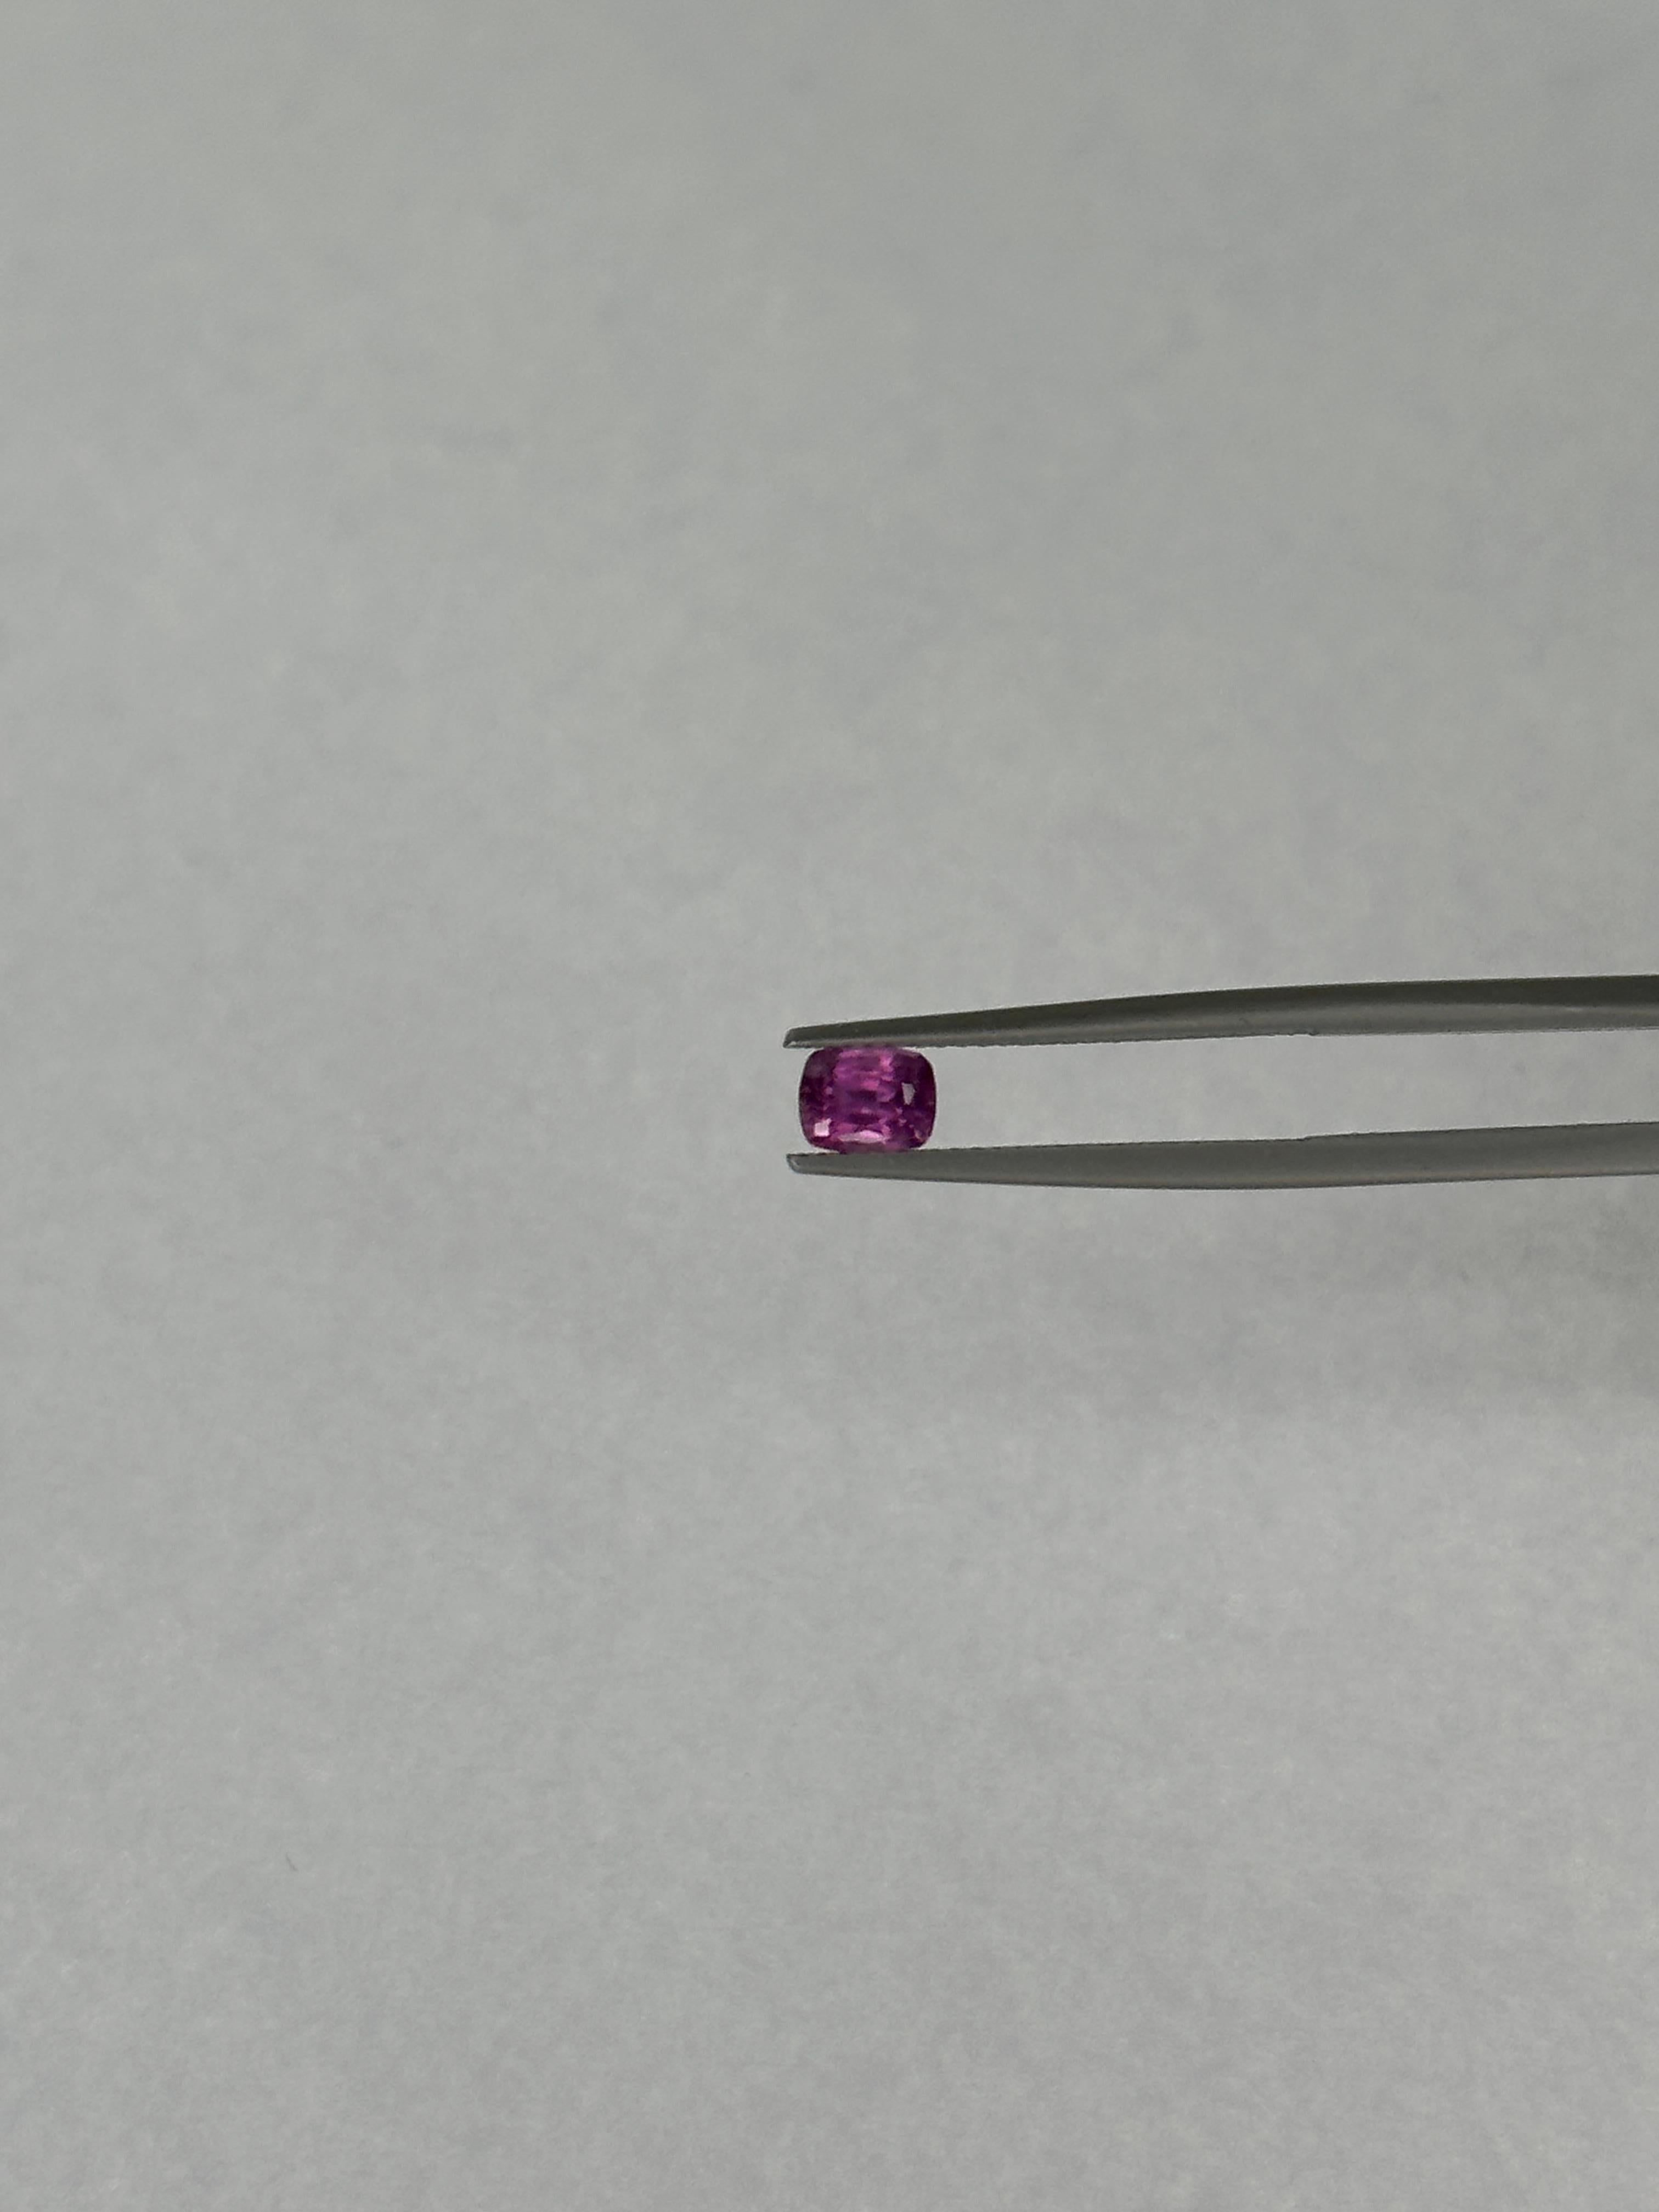 A stunning Fancy Pink Sapphire from the Kenya, East Africa

ID #: FSC098
Weight: 0.79 Carats
Shape: Cushion
Crown: Modified Brilliant
Pavilion: Modified Brilliant
Gem Dimensions: 5.50 x 4.40 x 3.50 mm
Color: Pink

GIA Color Grade: strpPk 6/4 (Hue :